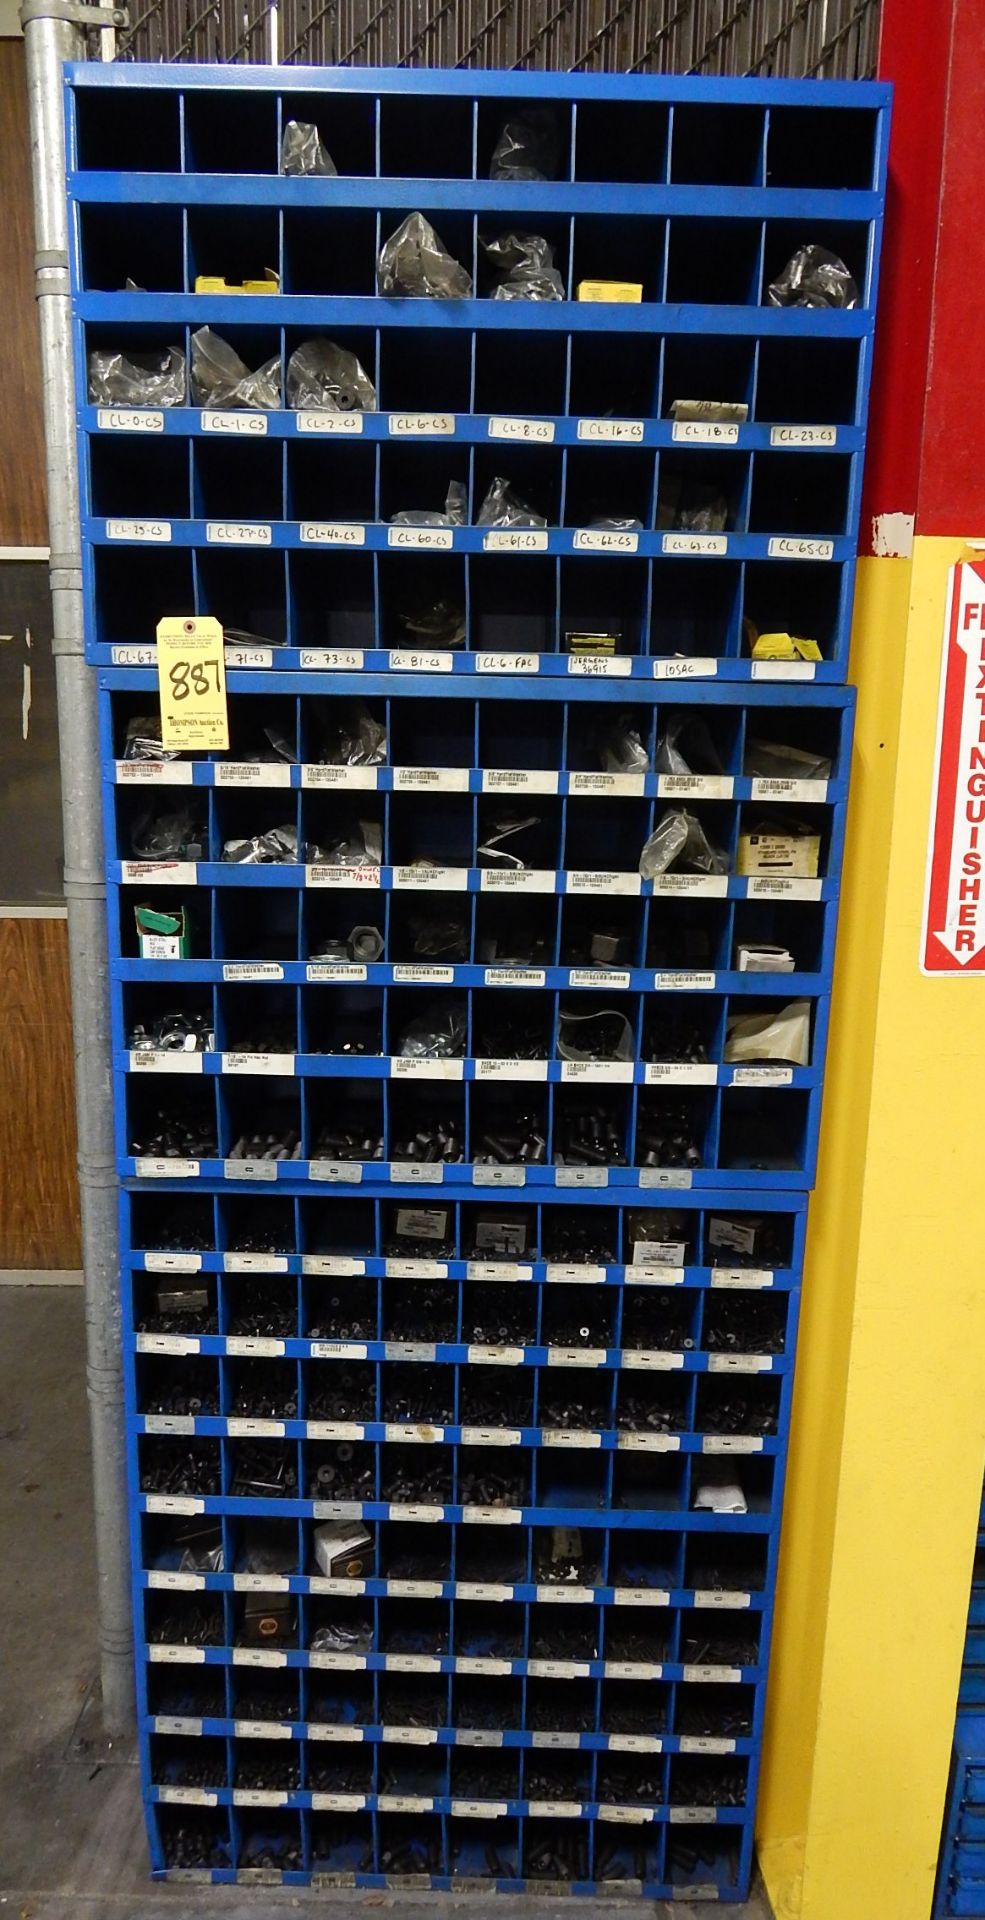 Fastenal Cabinet and Contents, Fastening Items and Hardware